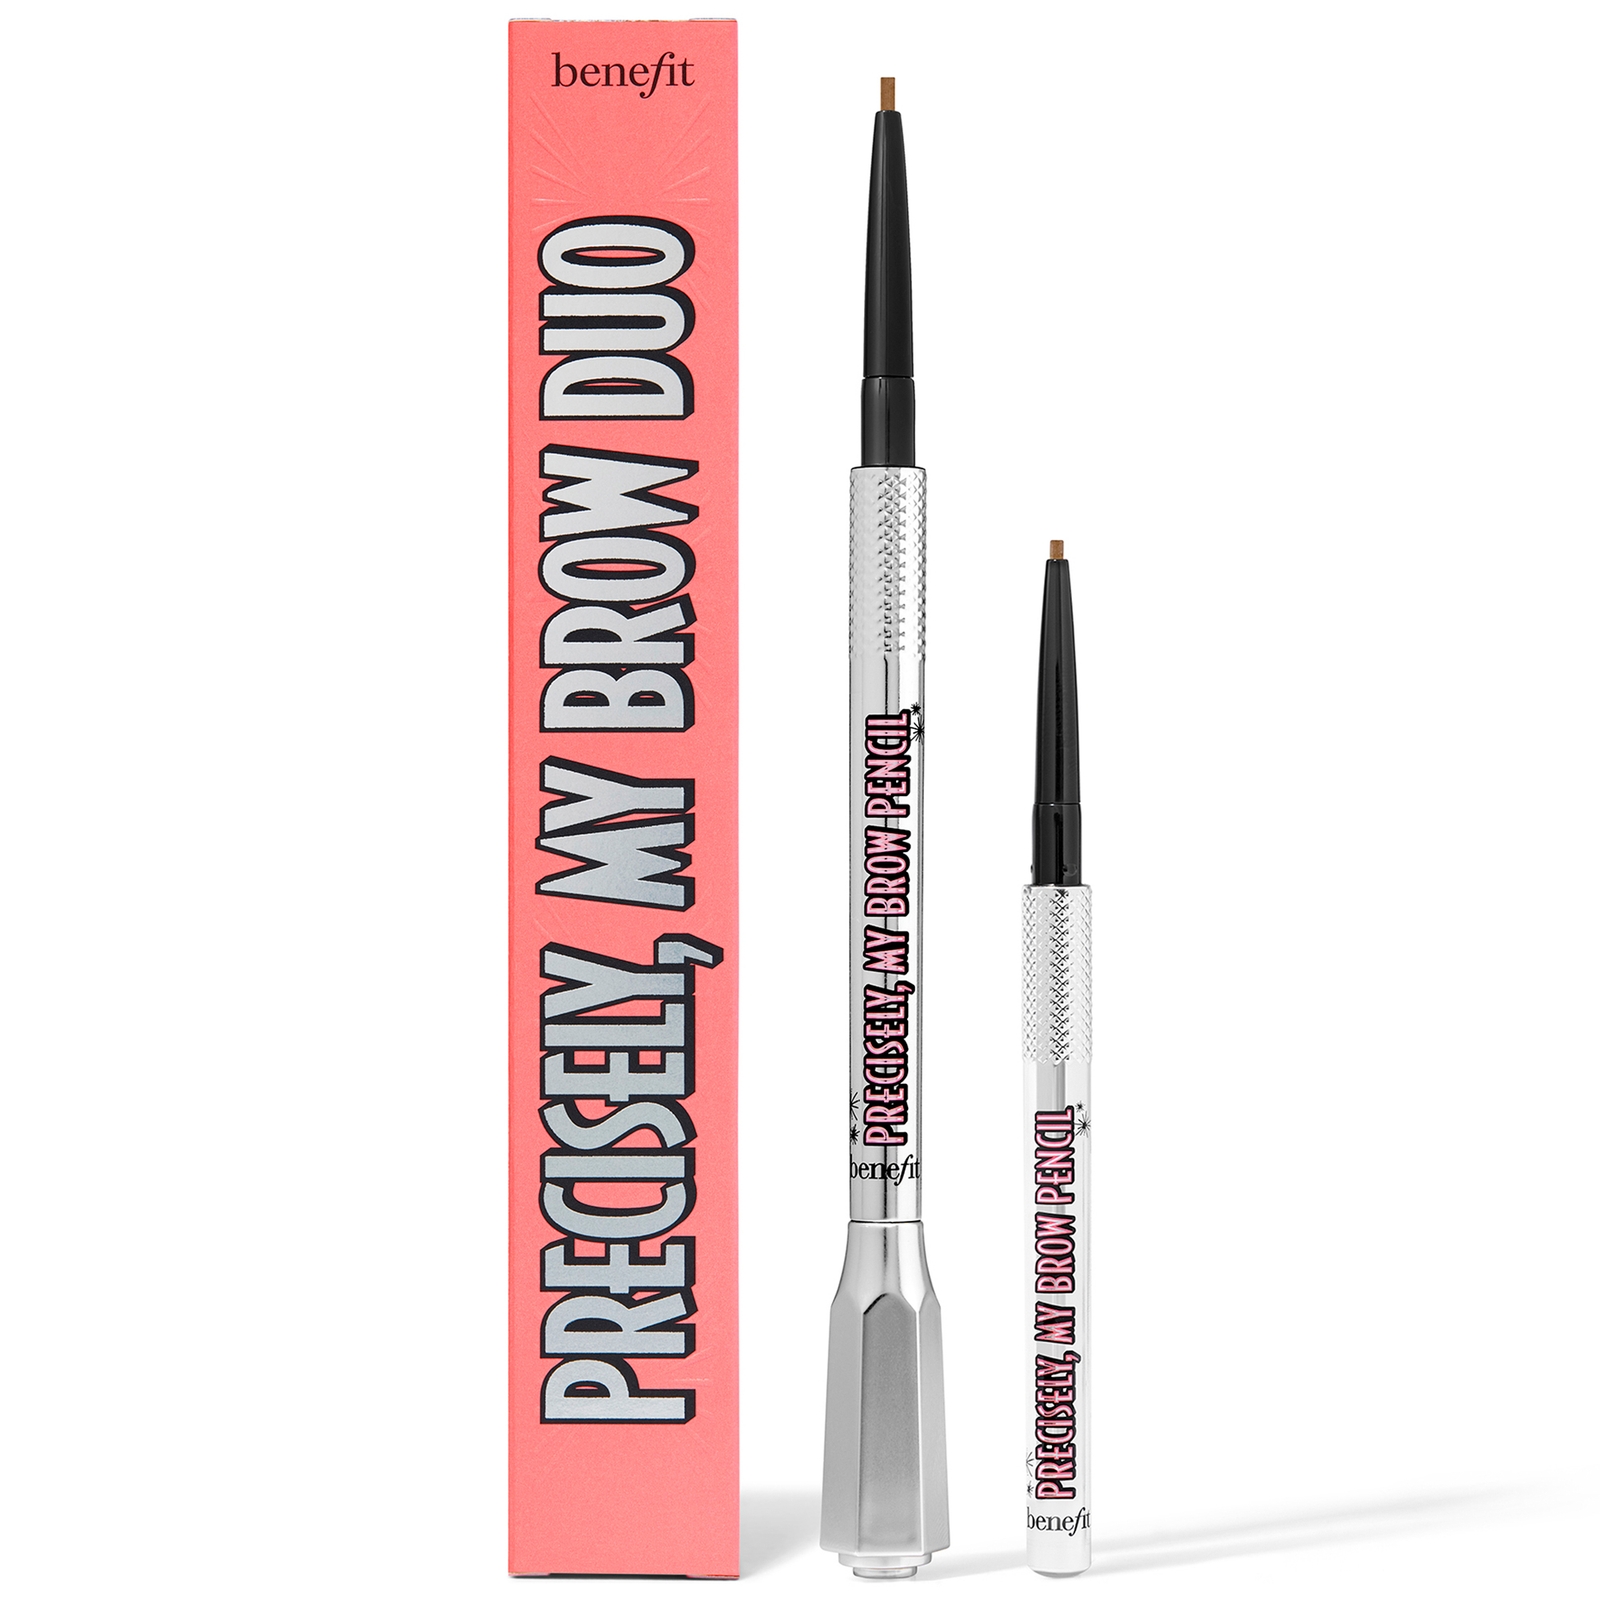 benefit The Precise Pair Precisely My Brow Pencil Duo Set (Various Shades) - 2.5 Neutral Blonde